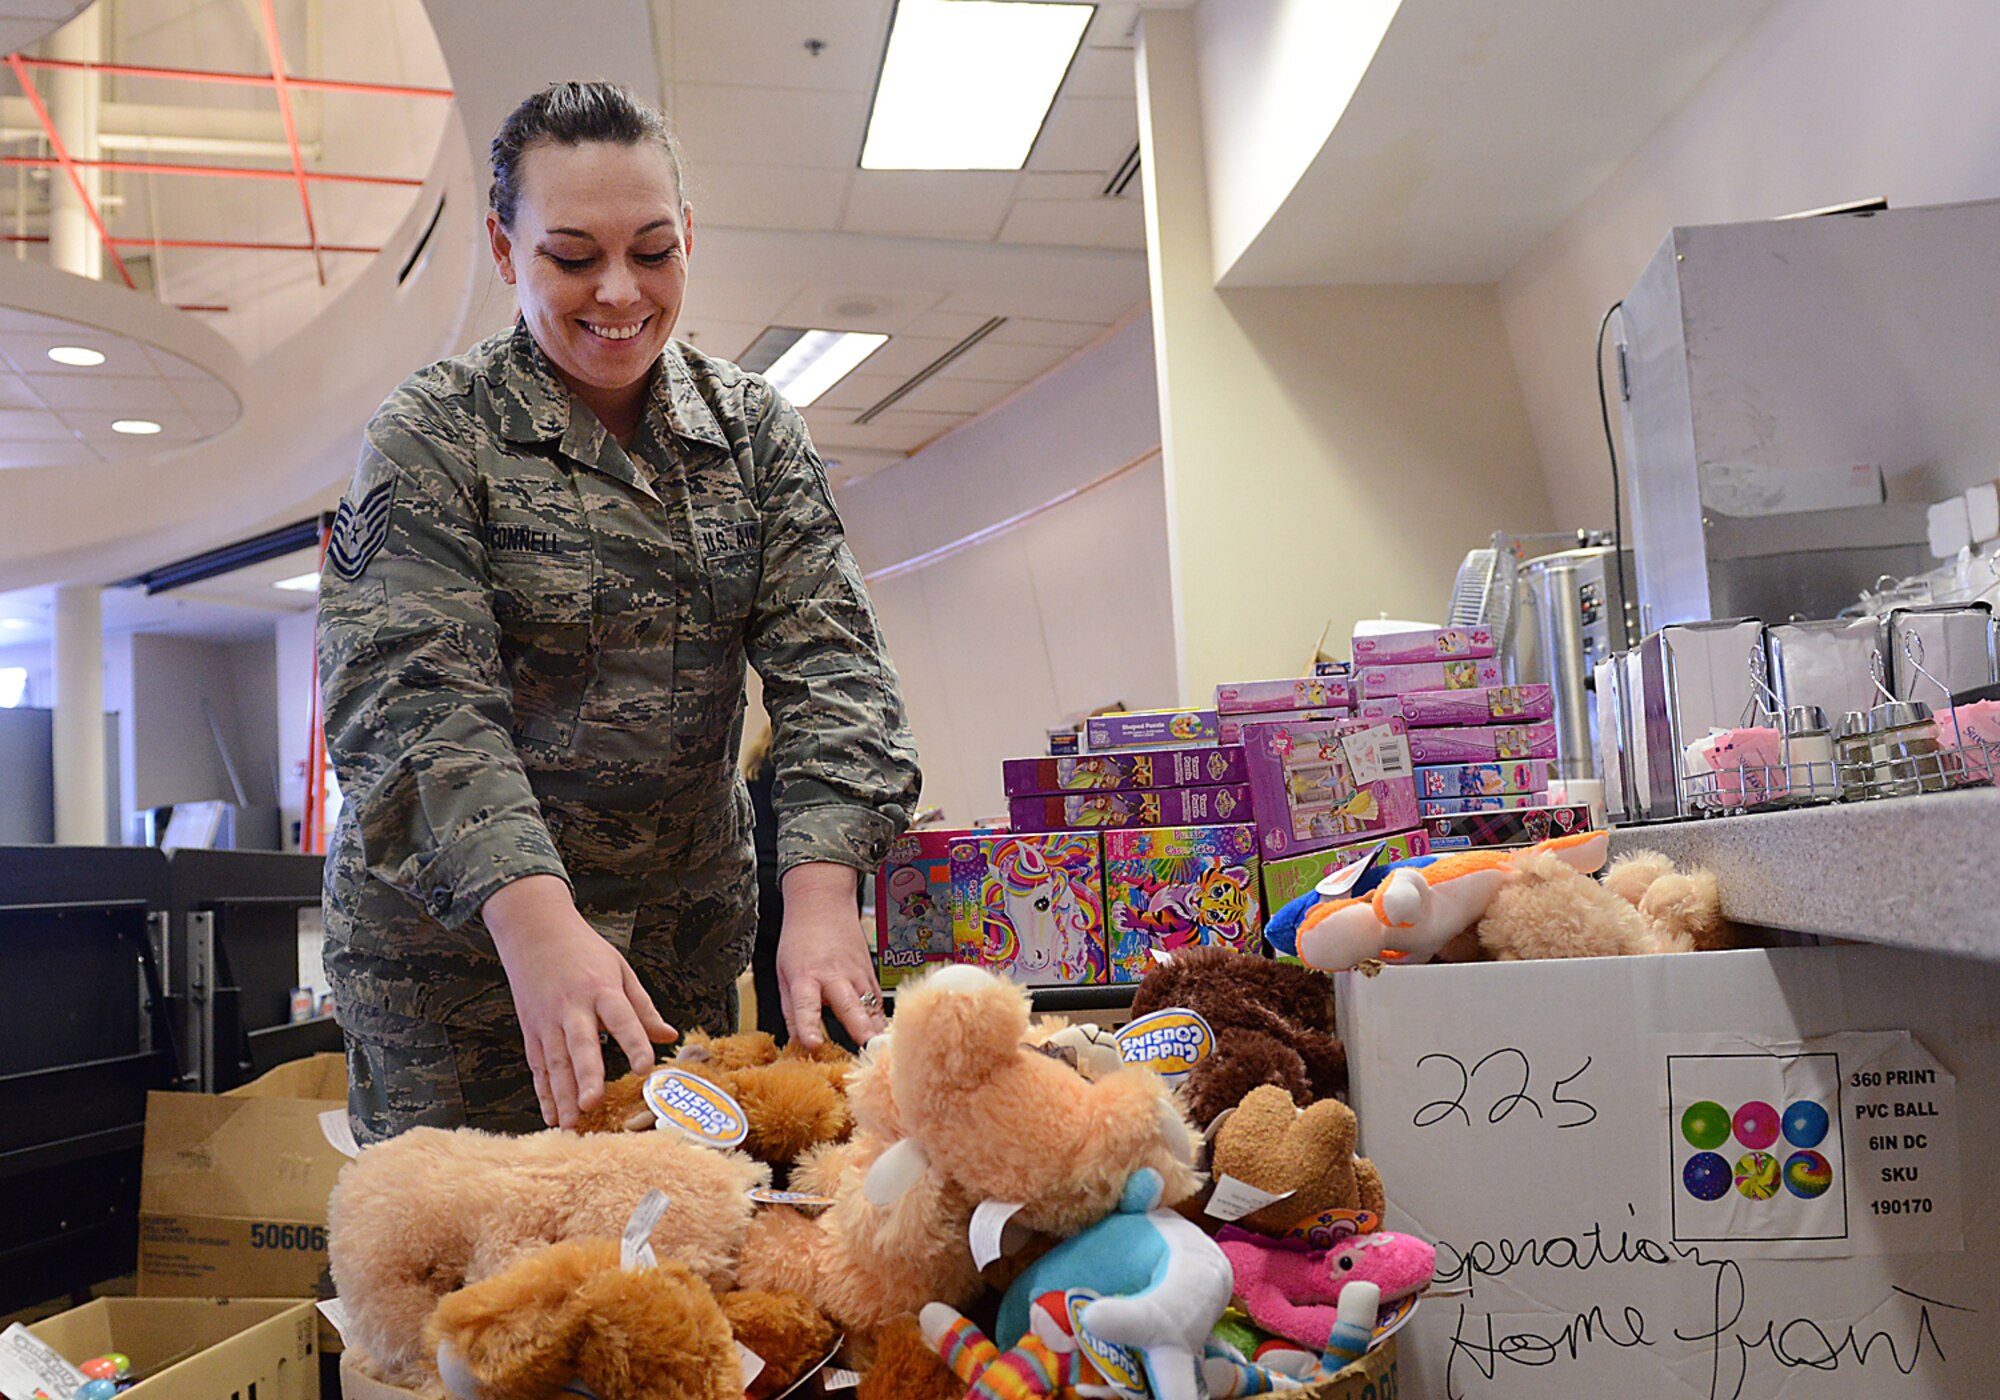 Technical Sergeant Elizabeth O'Connell, 138th Fighter Wing's Airman and Family Readiness Assistant, helps transform the 138th Fighter Wing Aerospace Dining Facility into a one stop shop, offering up thousands of toys to the immediate families of Airman from the 138th Fighter Wing, Tulsa Air National Guard.  Thousands of toys were donated by Family Dollar stores in the local area, as part of Operation Homefront. (U.S. Air Force Photo by Senior Master Sgt. Preston Chasteen/Released)